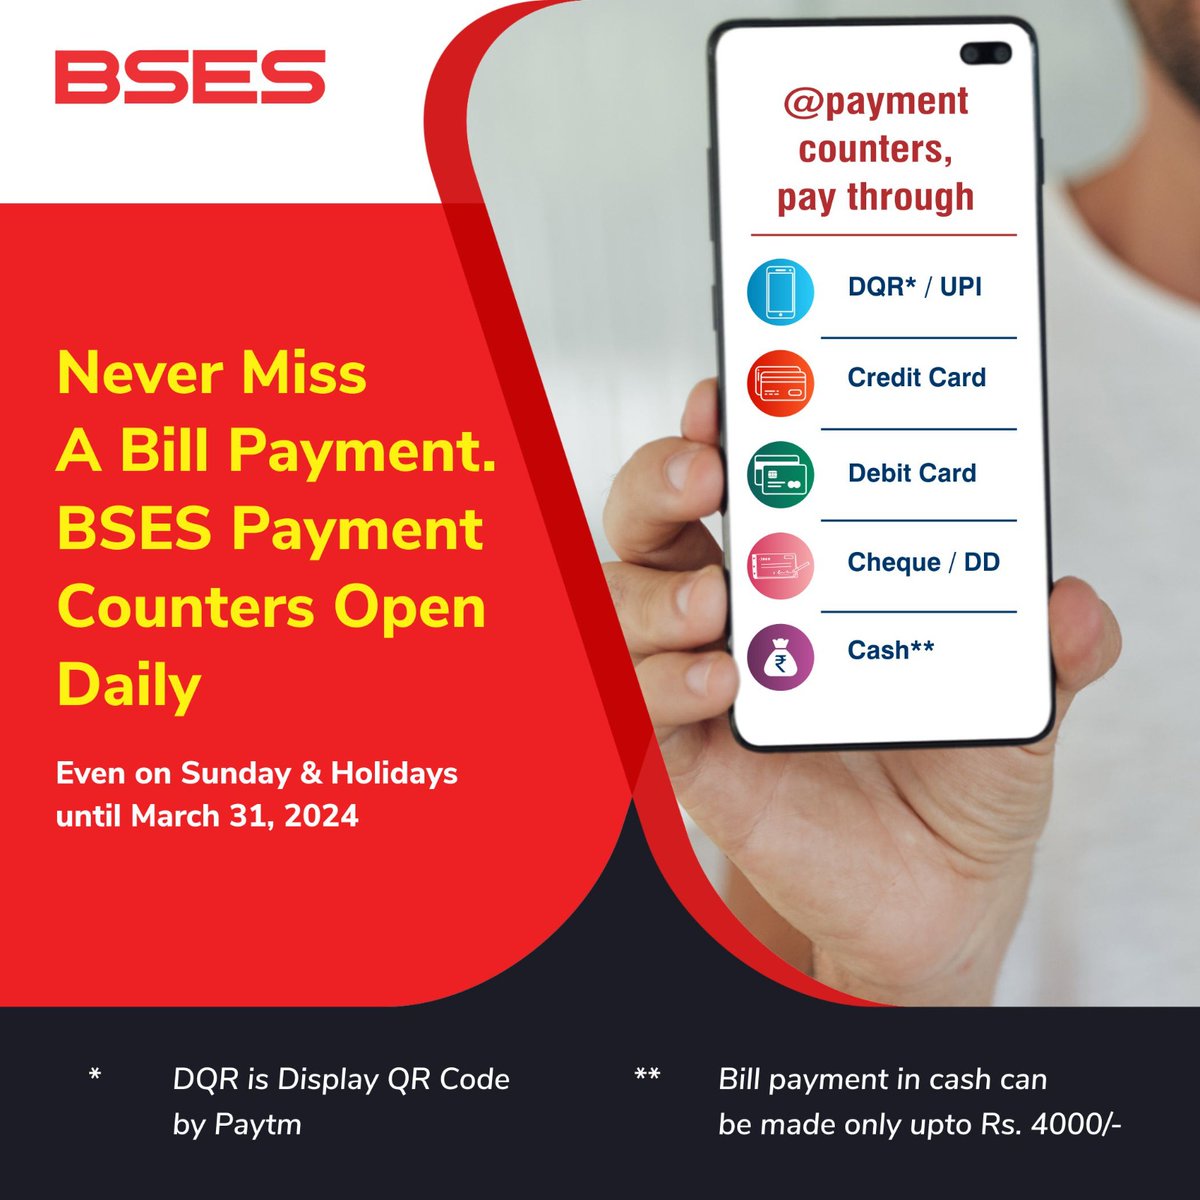 Good news for BSES consumers! For your convenience, we are keeping our payment counters open on all days, including Sundays and holidays, until March 31. This means you can now pay your electricity bill at your convenience. #BSES